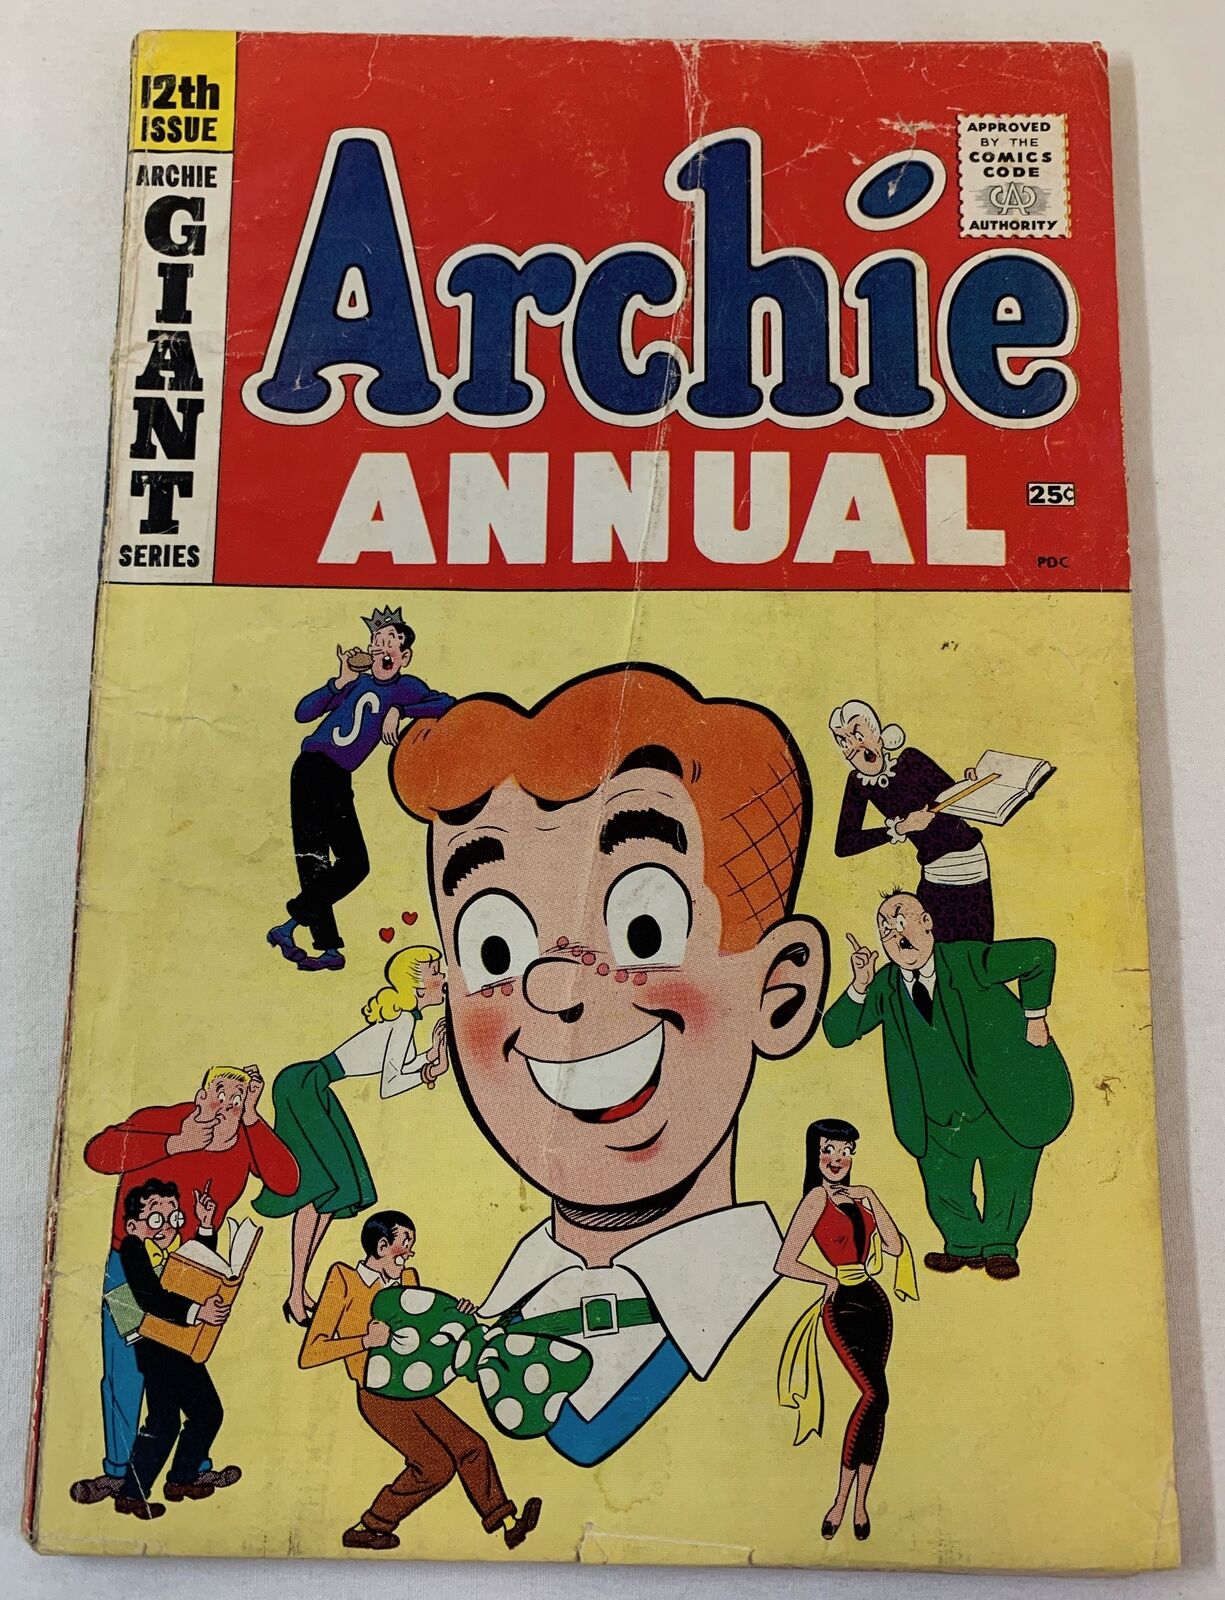 1960 ARCHIE ANNUAL #12 ~ water damage, back cover detached